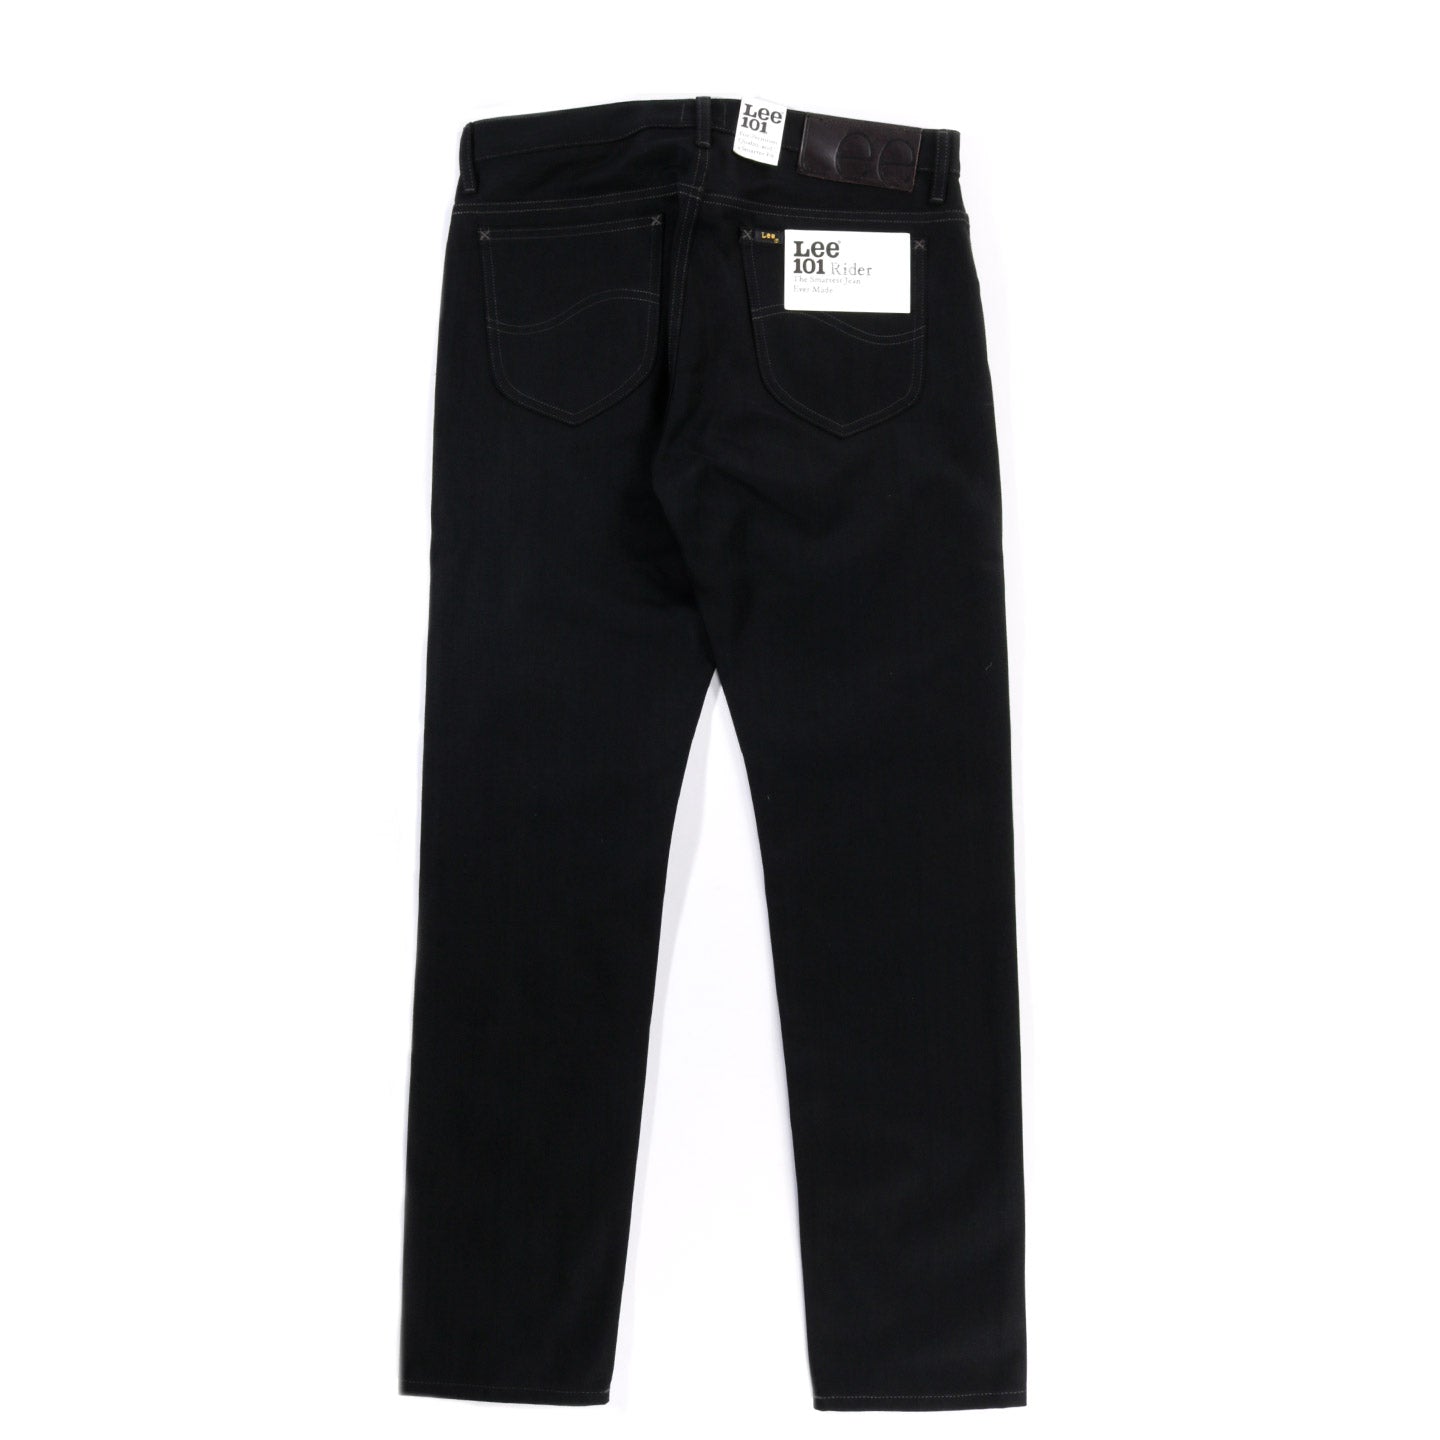 LEE 101 RIDER BLACK SELVAGE DRY | TODAY CLOTHING